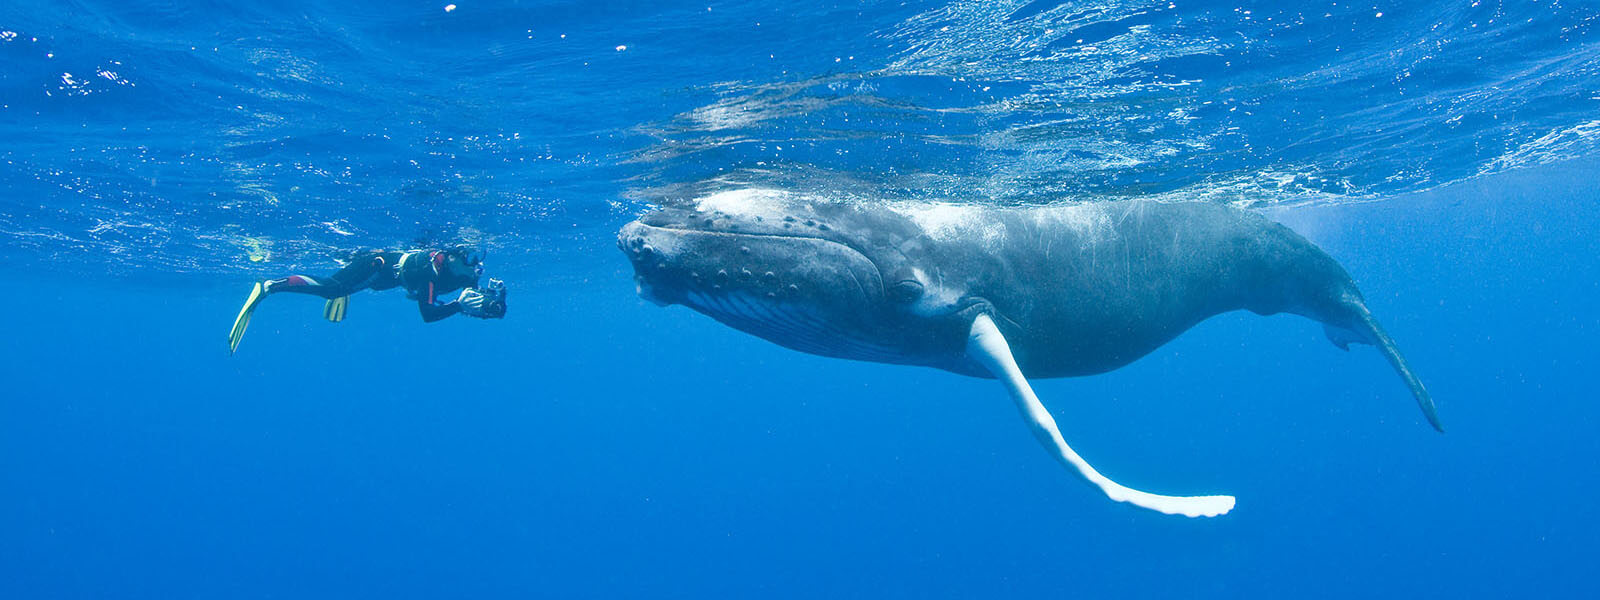 Snorkeler getting visited by a curious humpback whale